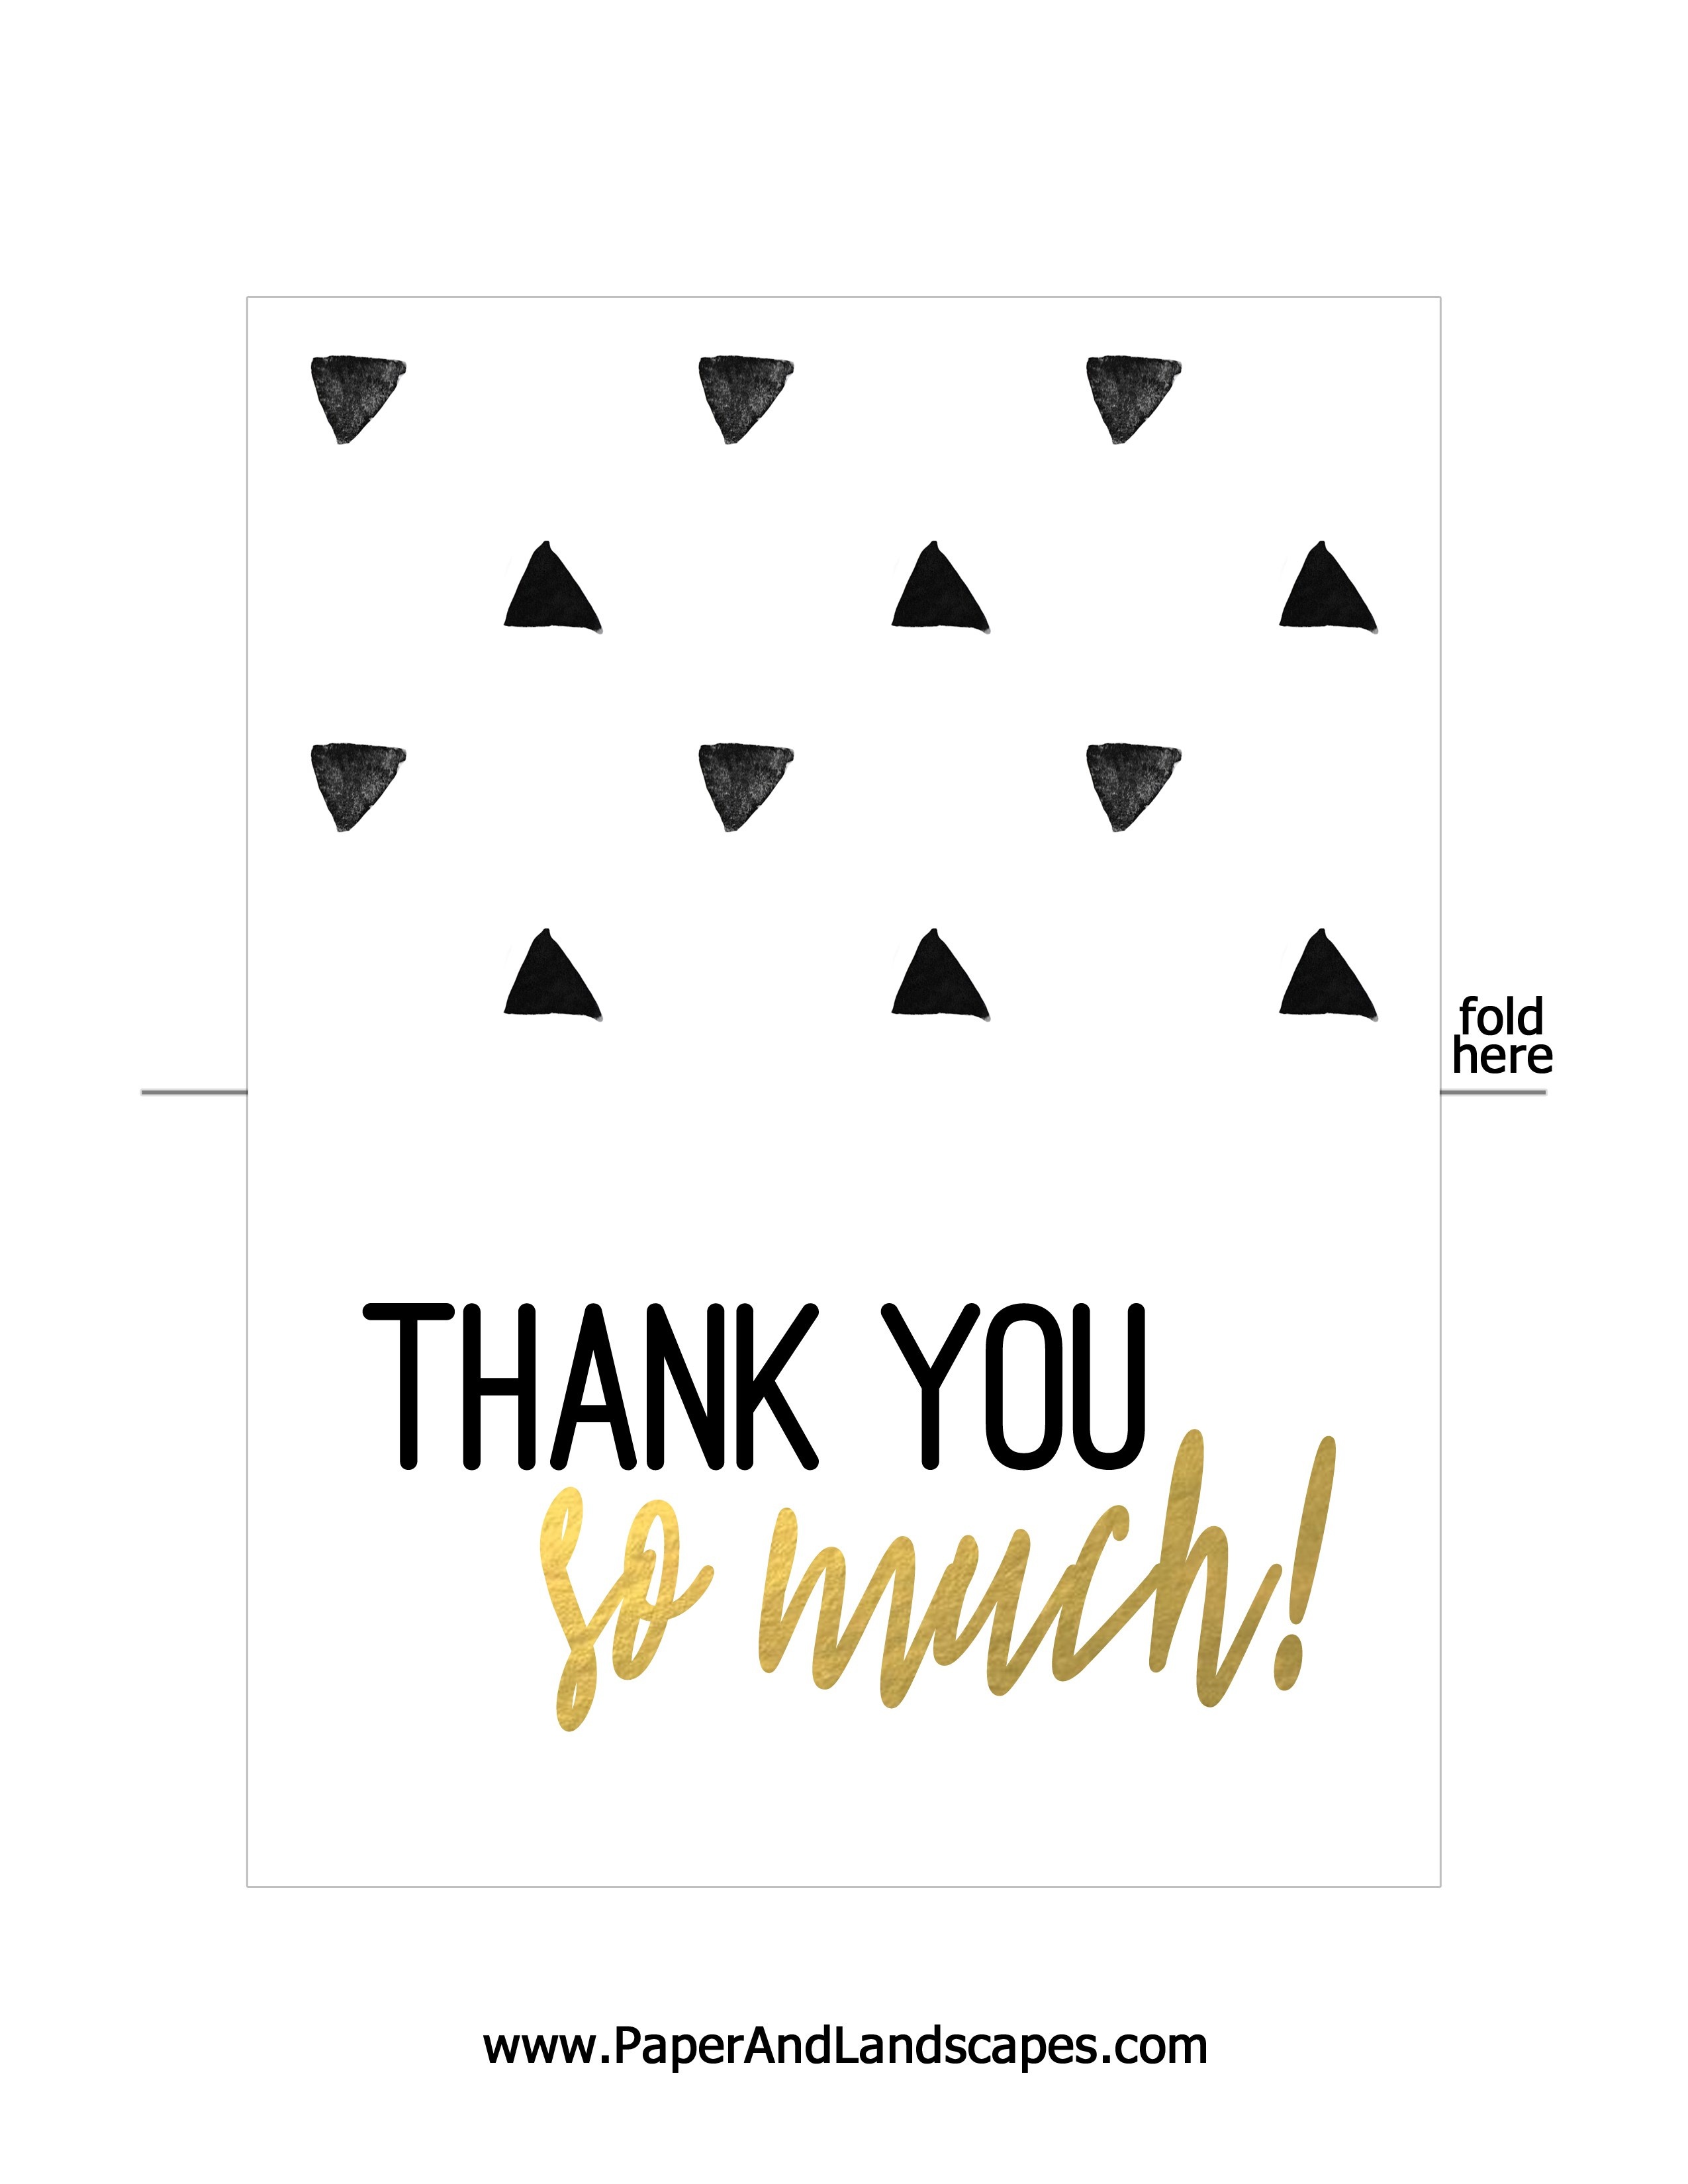 Free Printable Thank You Cards - Paper And Landscapes - Free Printable Custom Thank You Cards